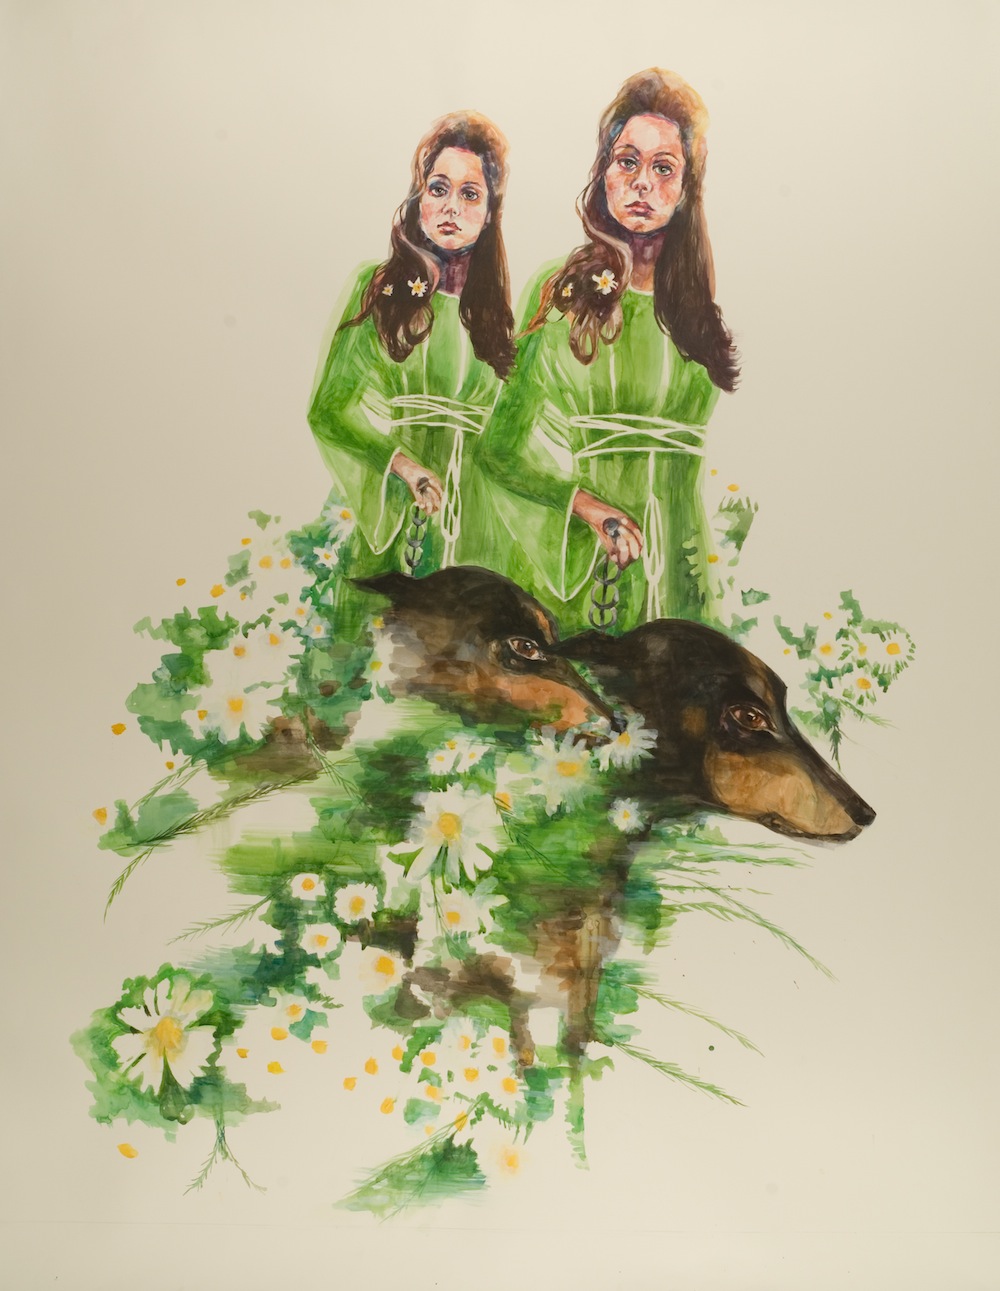 Sharon Shapiro, Daisy Chain, 2014; watercolor on paper, 72 by 60 inches.